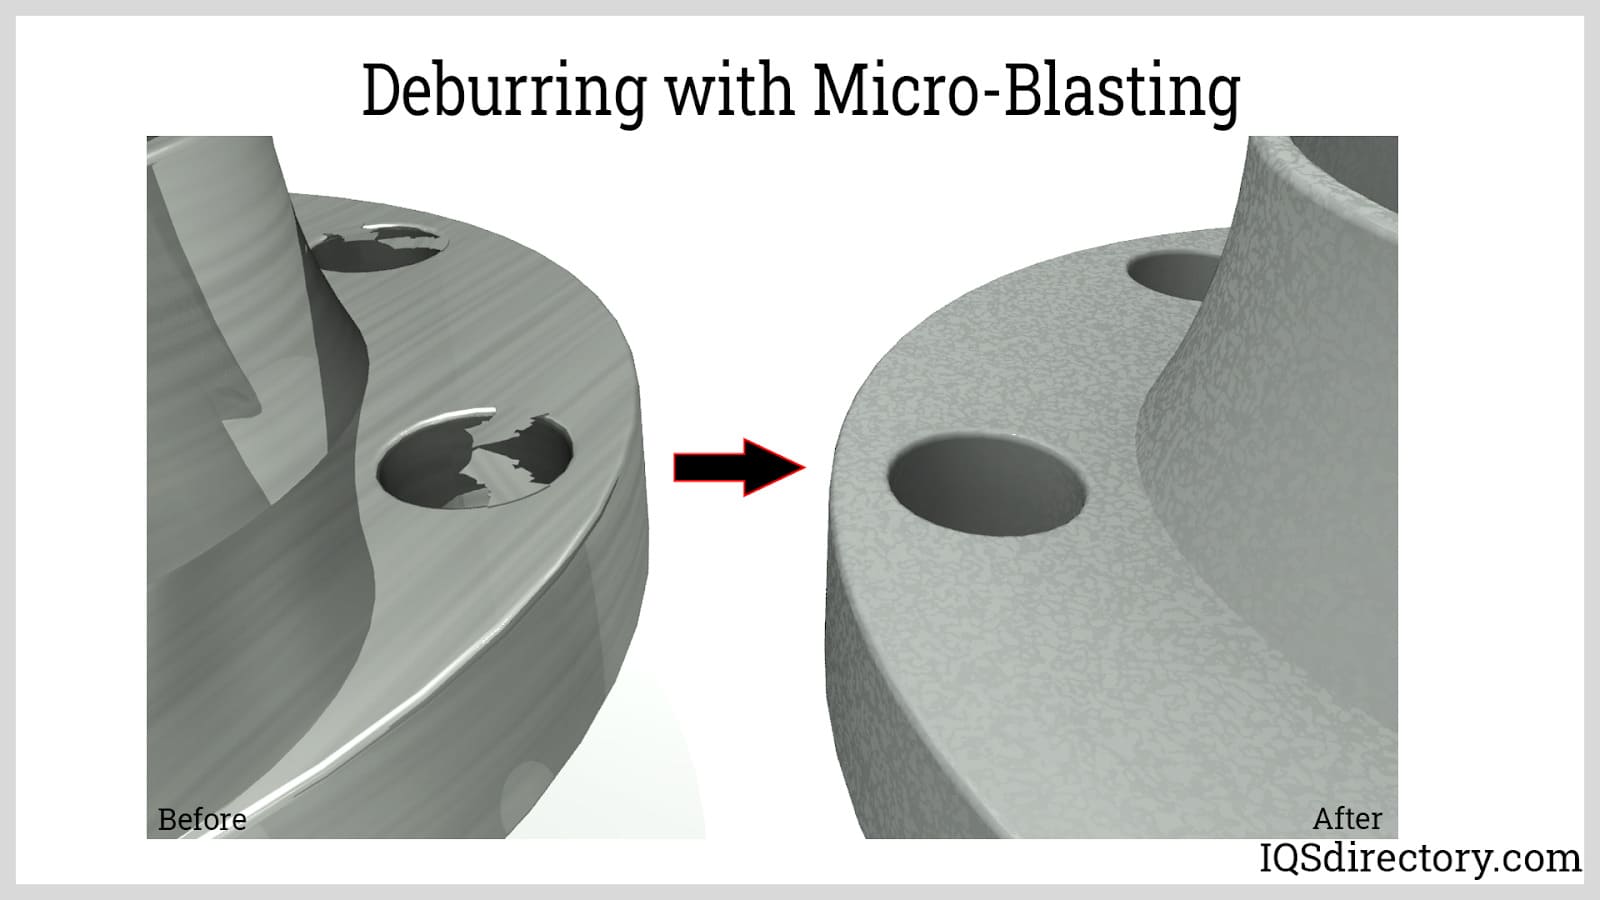 Deburring with Micro-Blasting